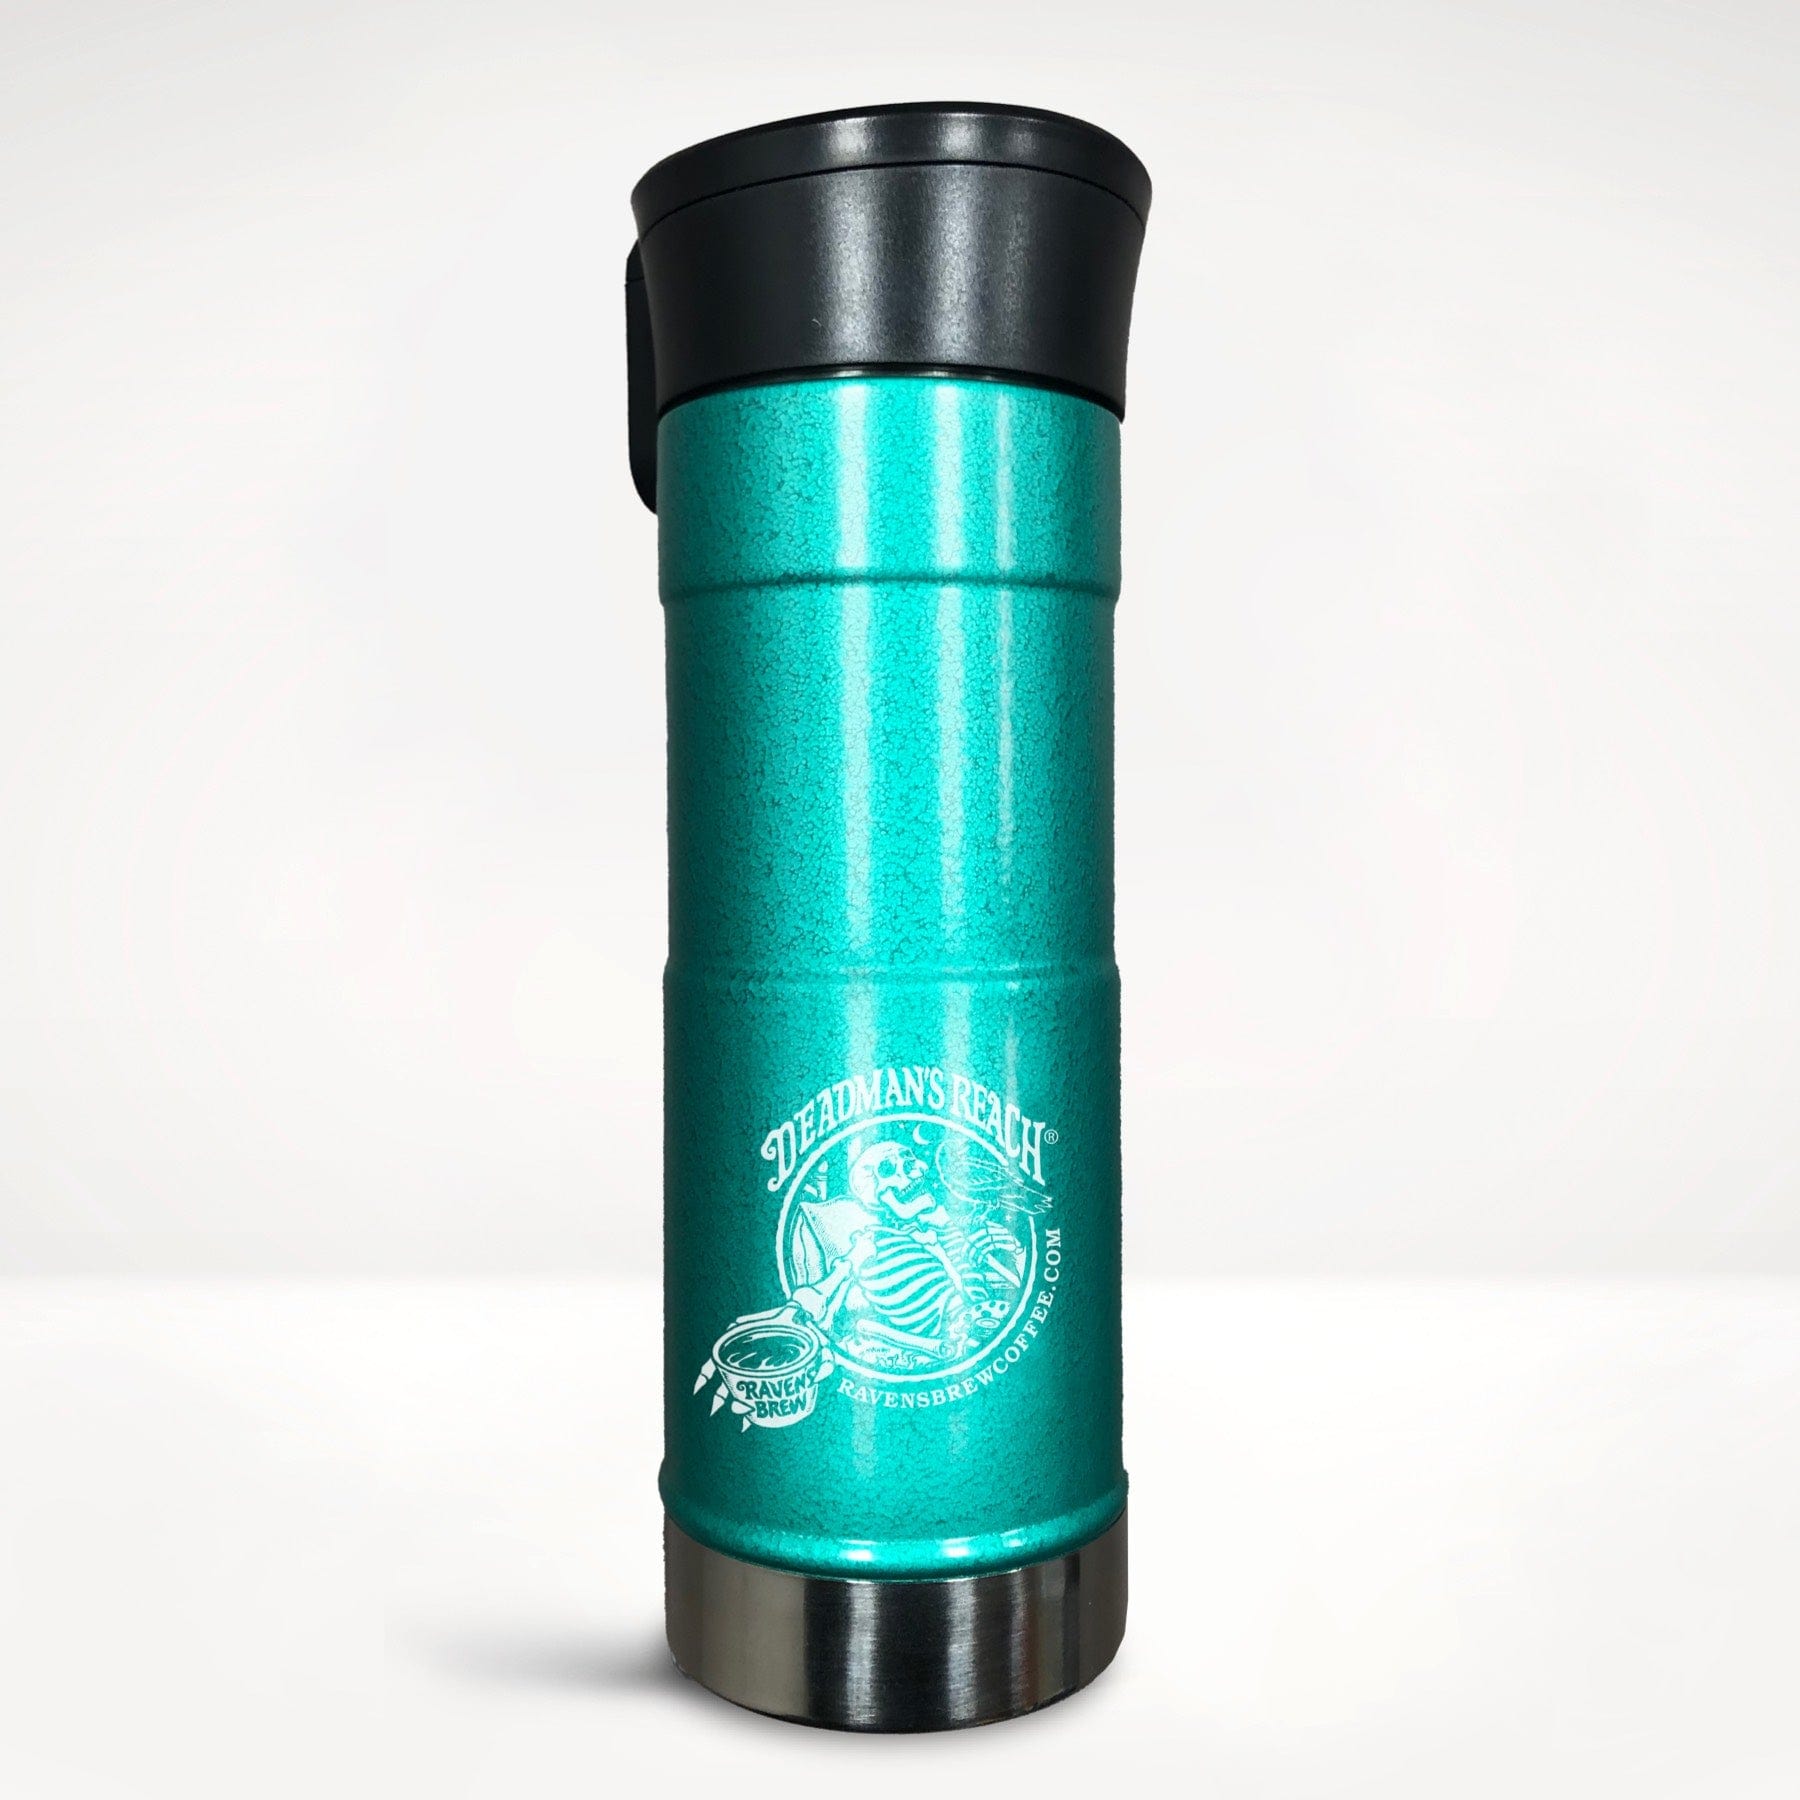 Deadman's Reach® coffee bright jade colored stainless steel tumbler front view featuring skeleton art in white with words Deadman's Reach® and Raven's Brew Coffee®.